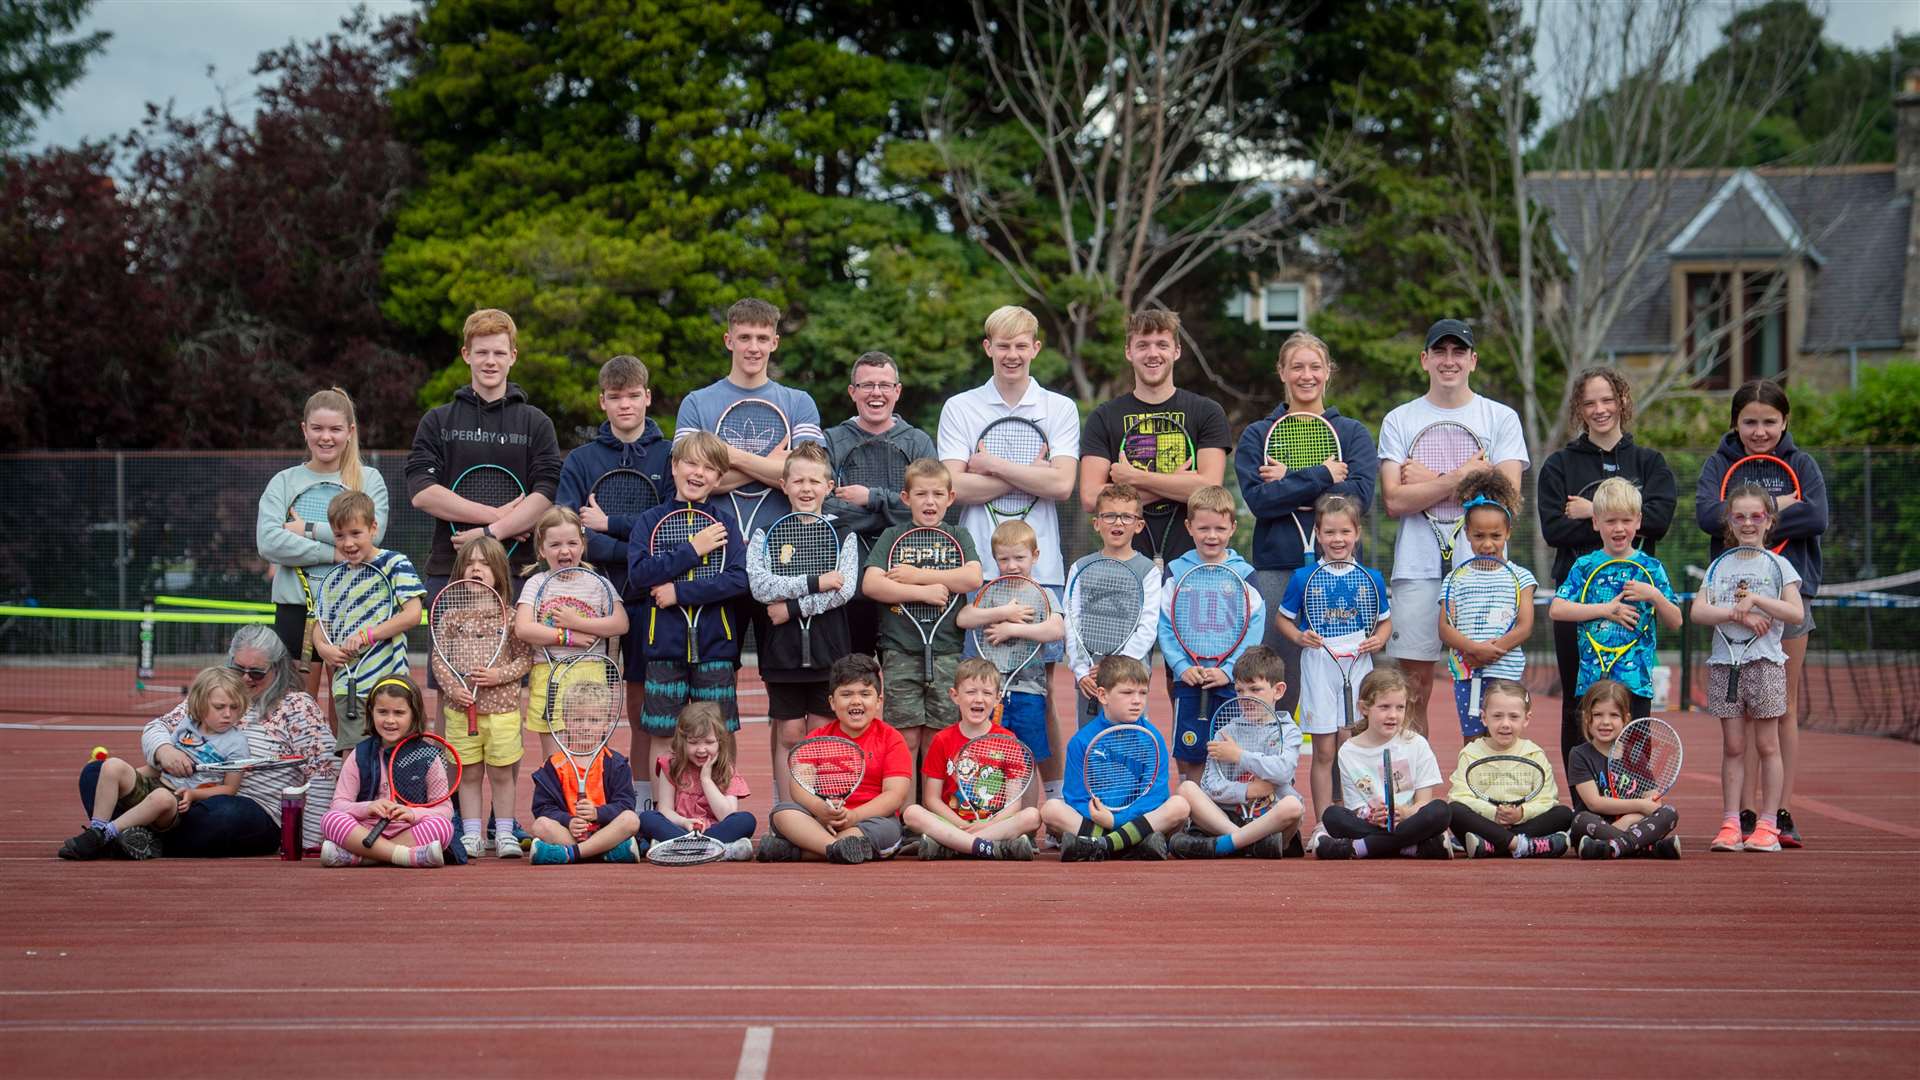 Bellfield Park Tennis Club summer camps take place during July and August.